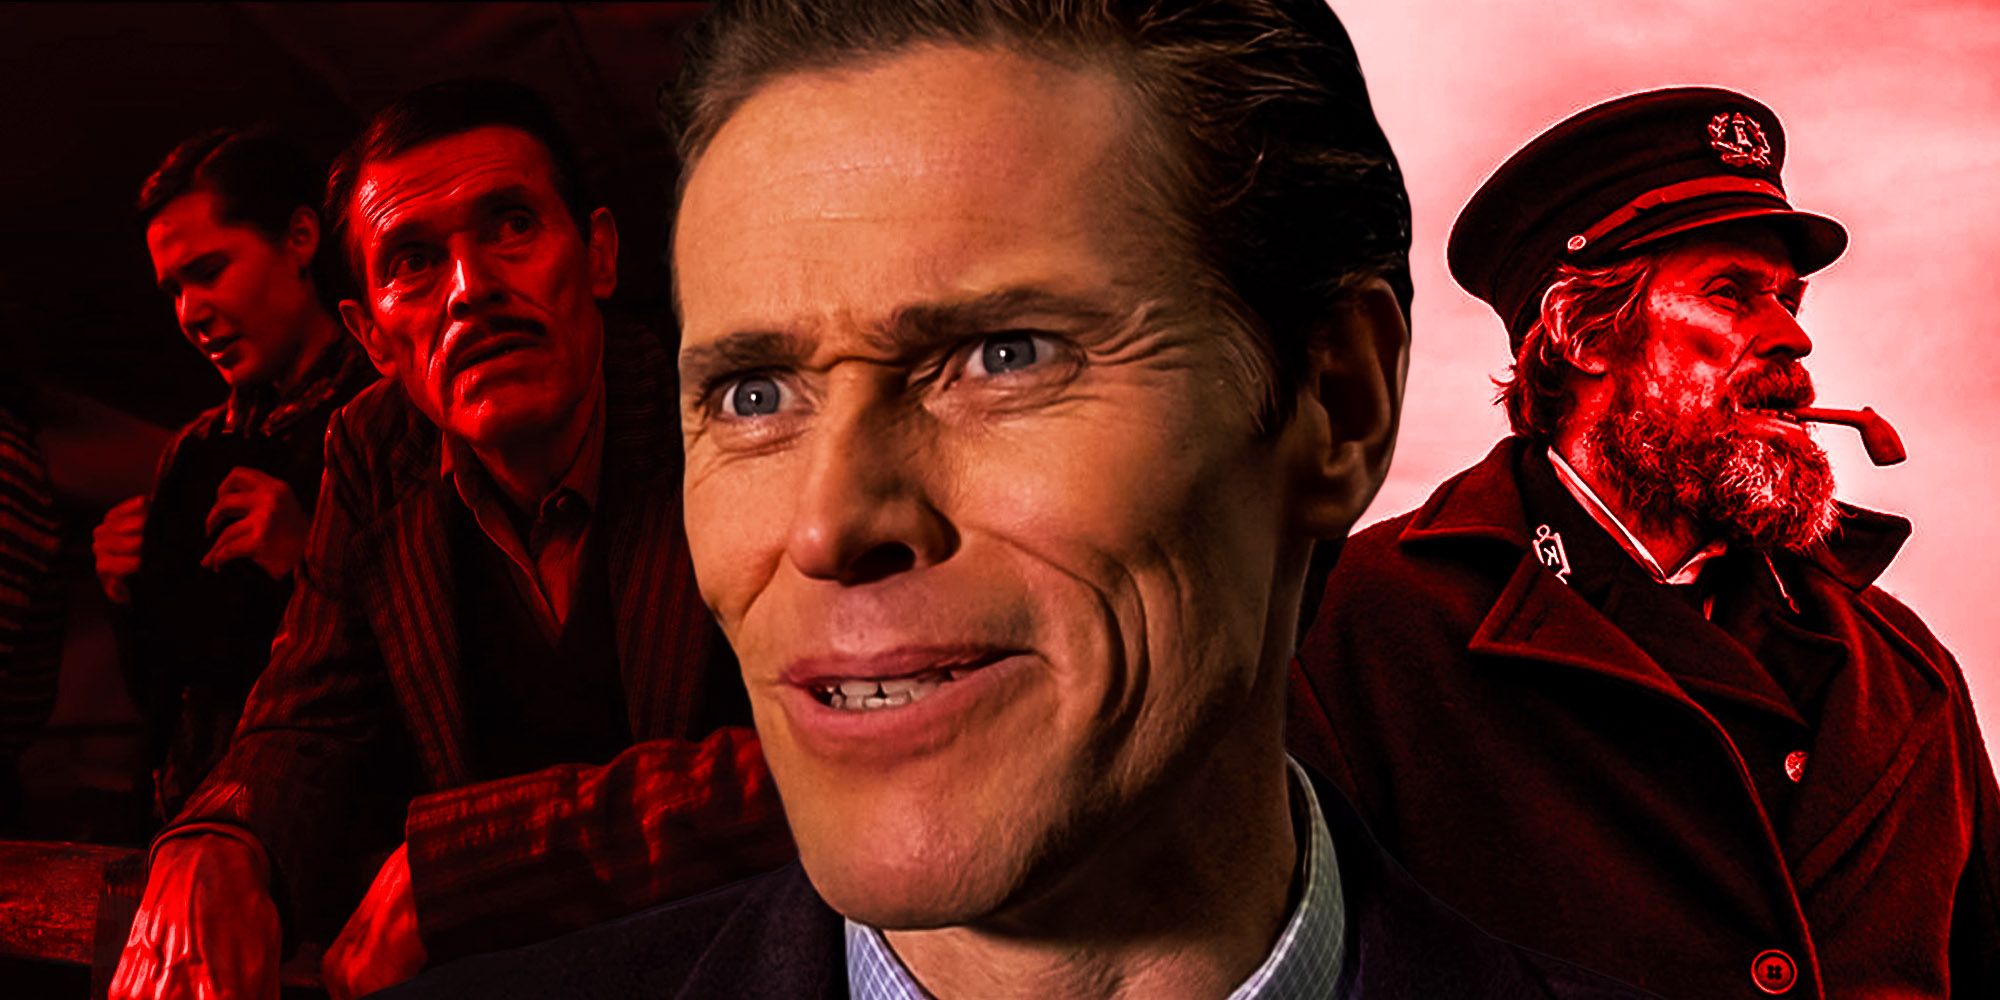 Willem Dafoe American psycho the lighthouse nightmare alley